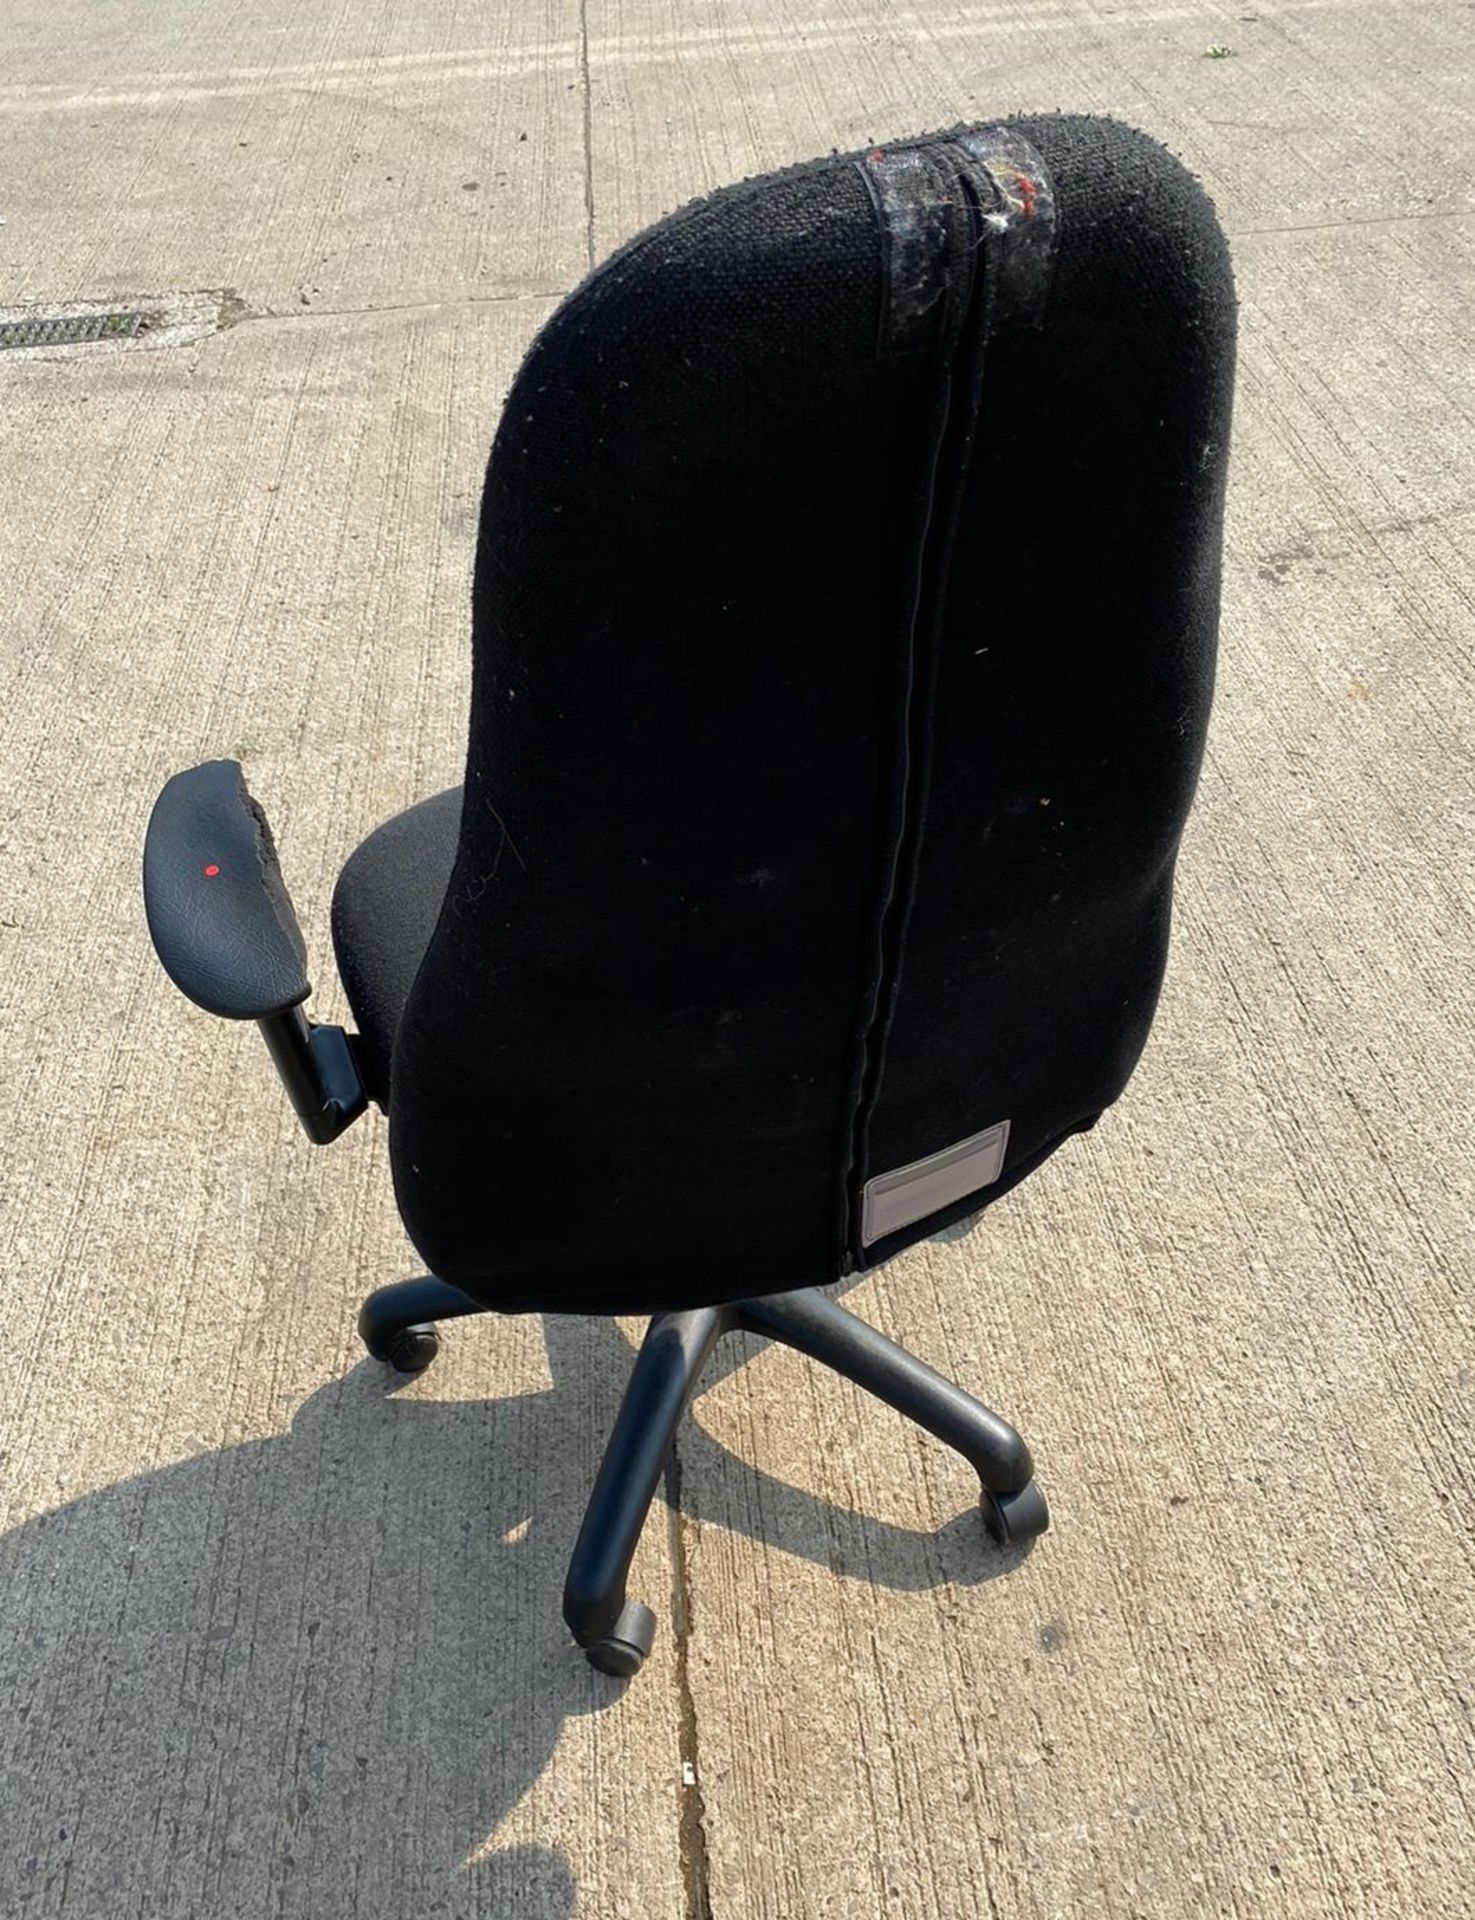 1 x Therapod Classic Synchro High Back Chair with Arms - Used Condition - Location: Altrincham WA14 - Image 9 of 12